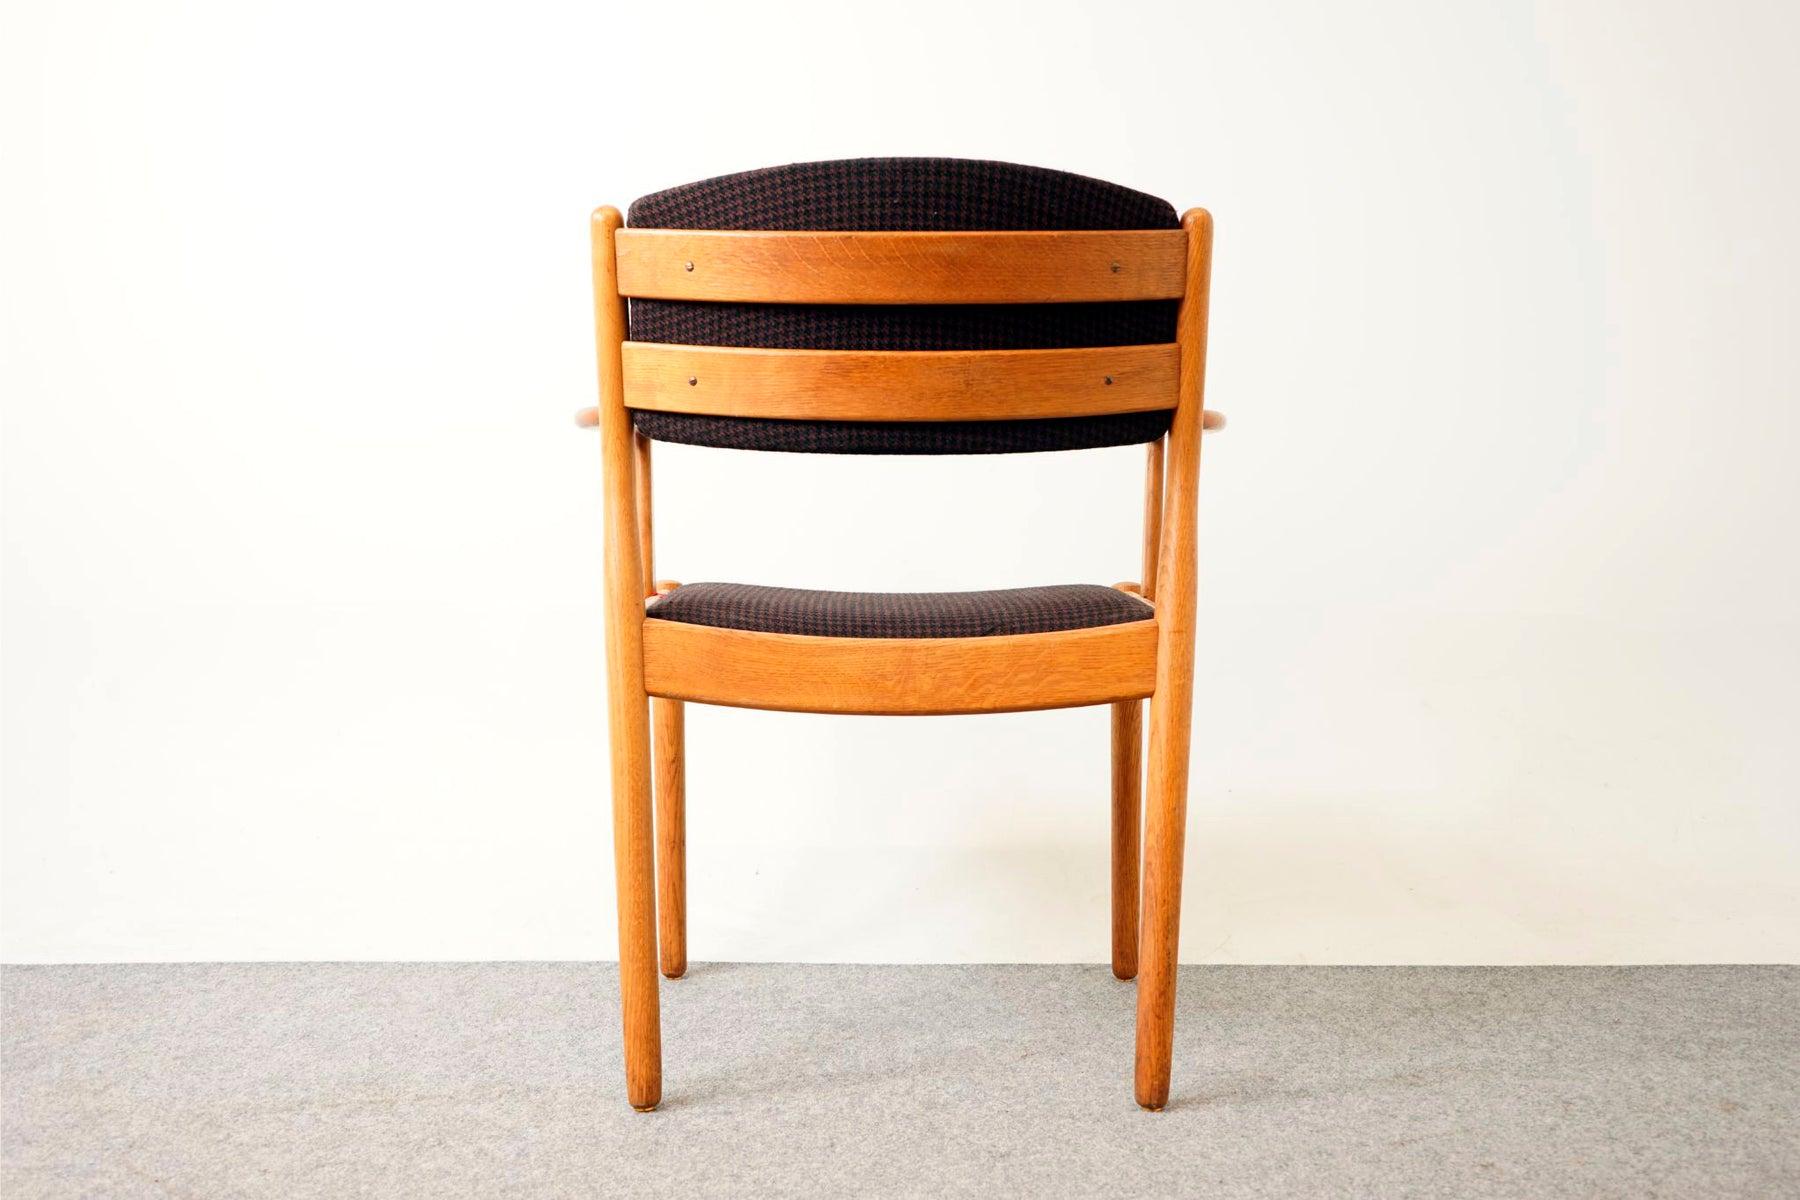 Mid-20th Century Scandinavian Mid-Century Modern Oak Arm Chair by Poul Volther for FDB